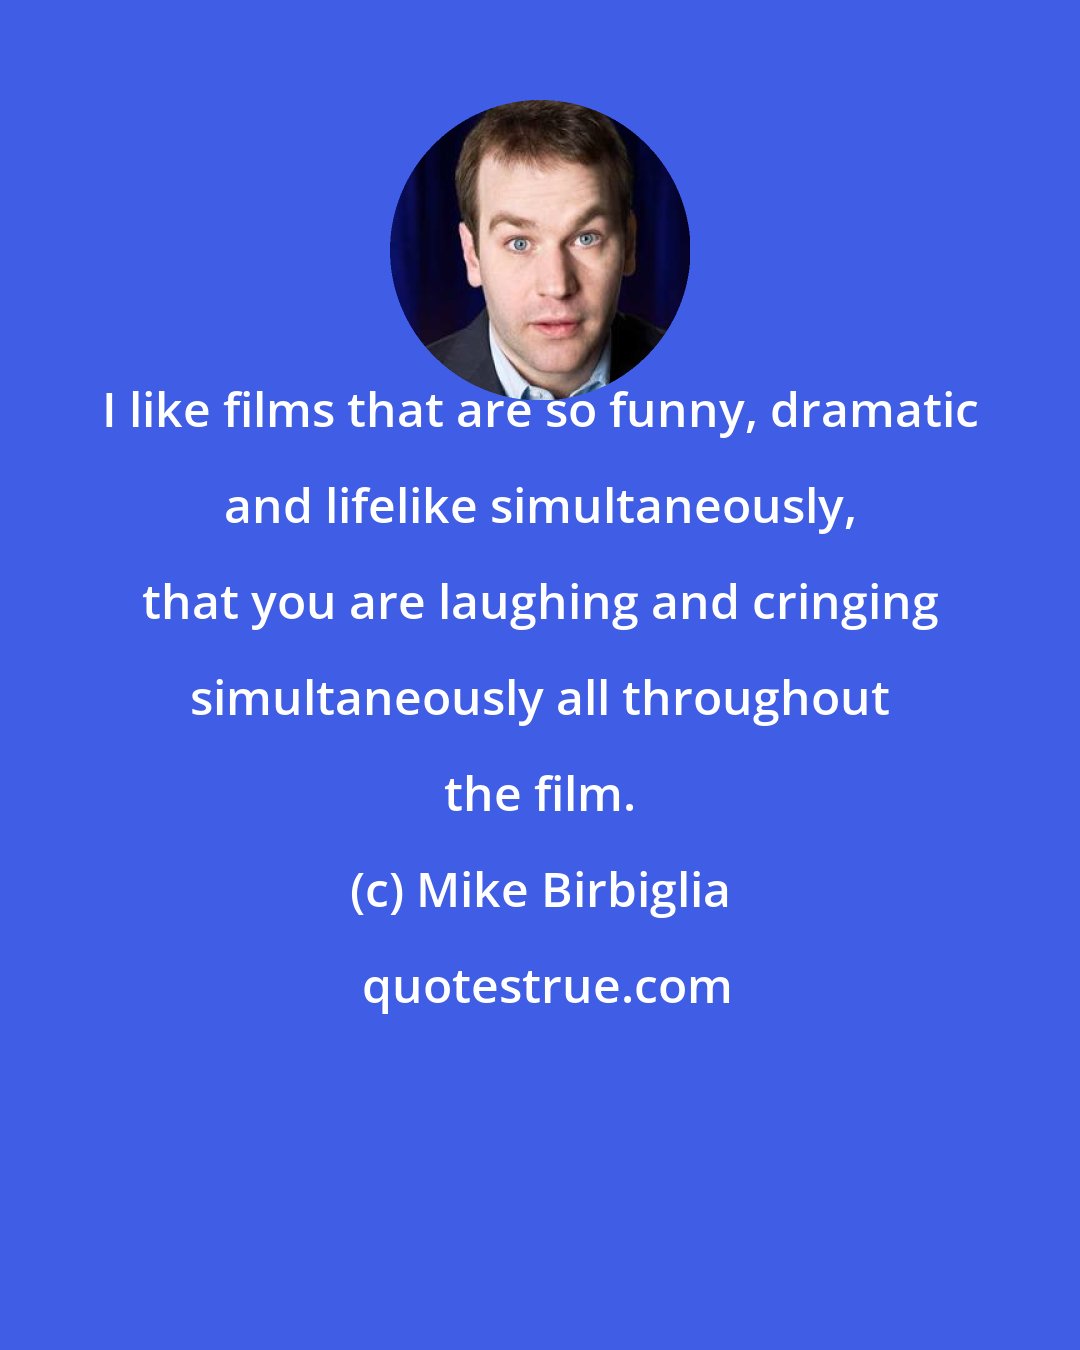 Mike Birbiglia: I like films that are so funny, dramatic and lifelike simultaneously, that you are laughing and cringing simultaneously all throughout the film.